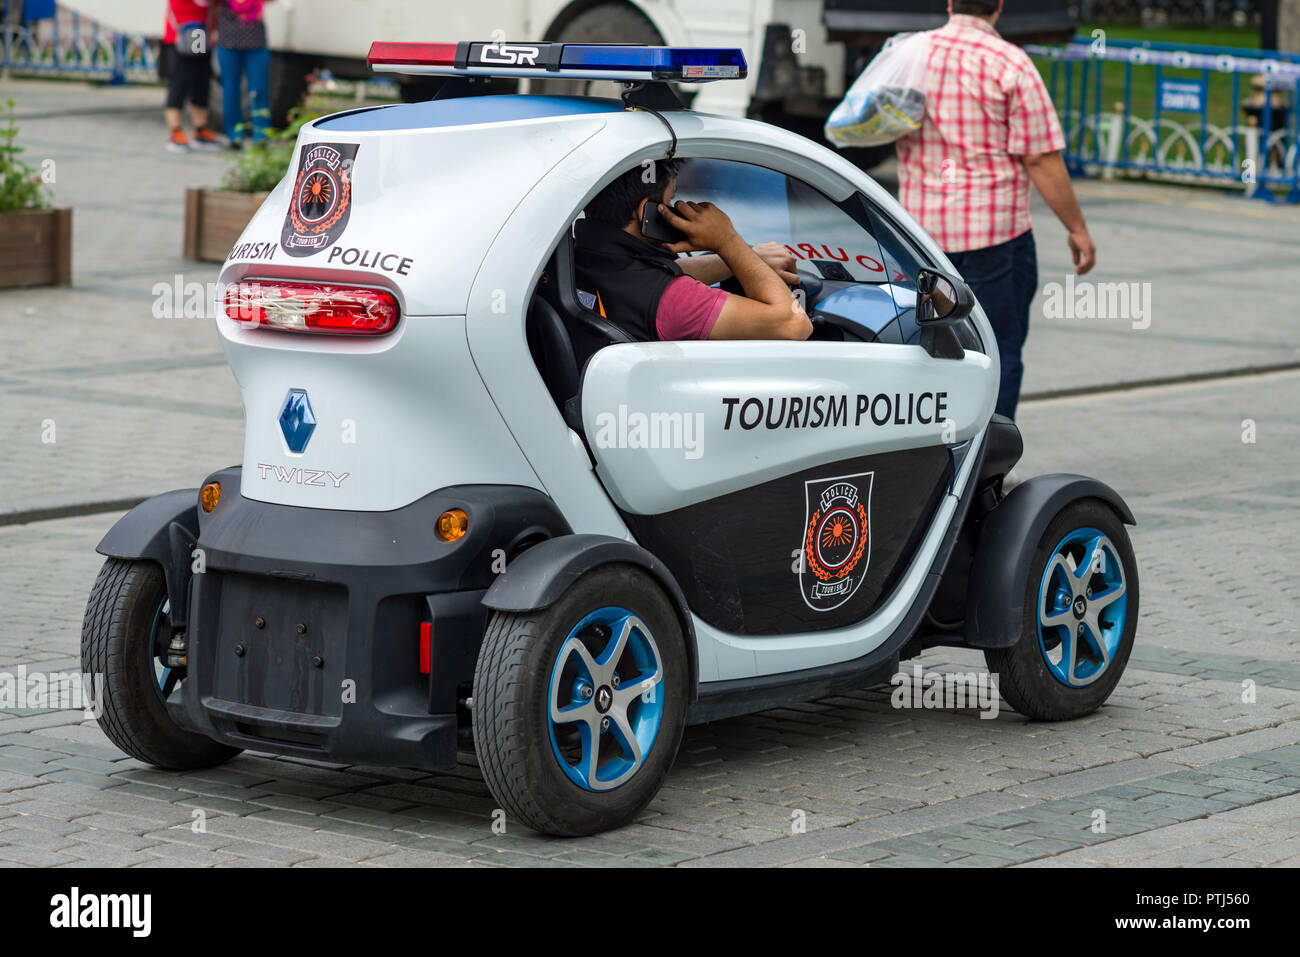 An all electric two seater Renault Twizy used as a tourism police vehicle with police officer in the car, Istanbul, Turkey Stock Photo